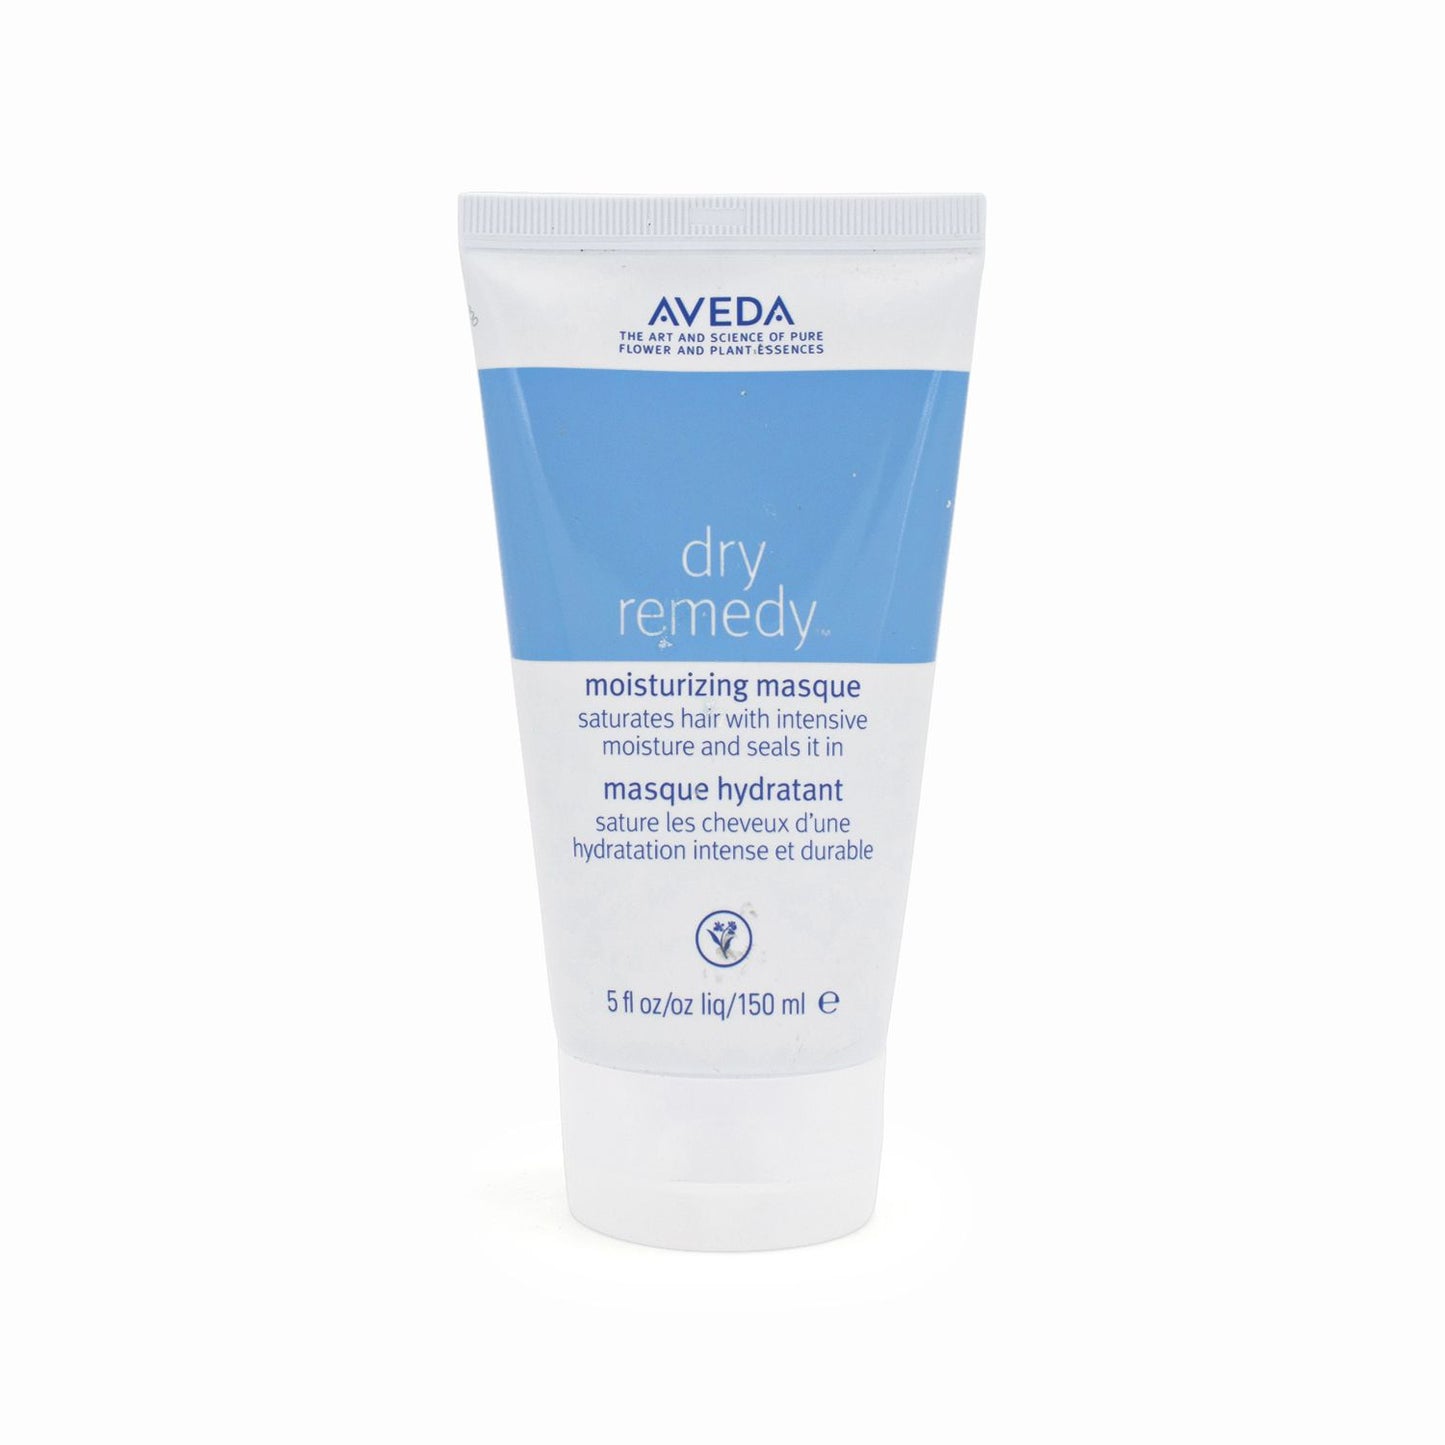 Aveda Dry Remedy Moisturizing Hair Masque 150ml - Imperfect Container